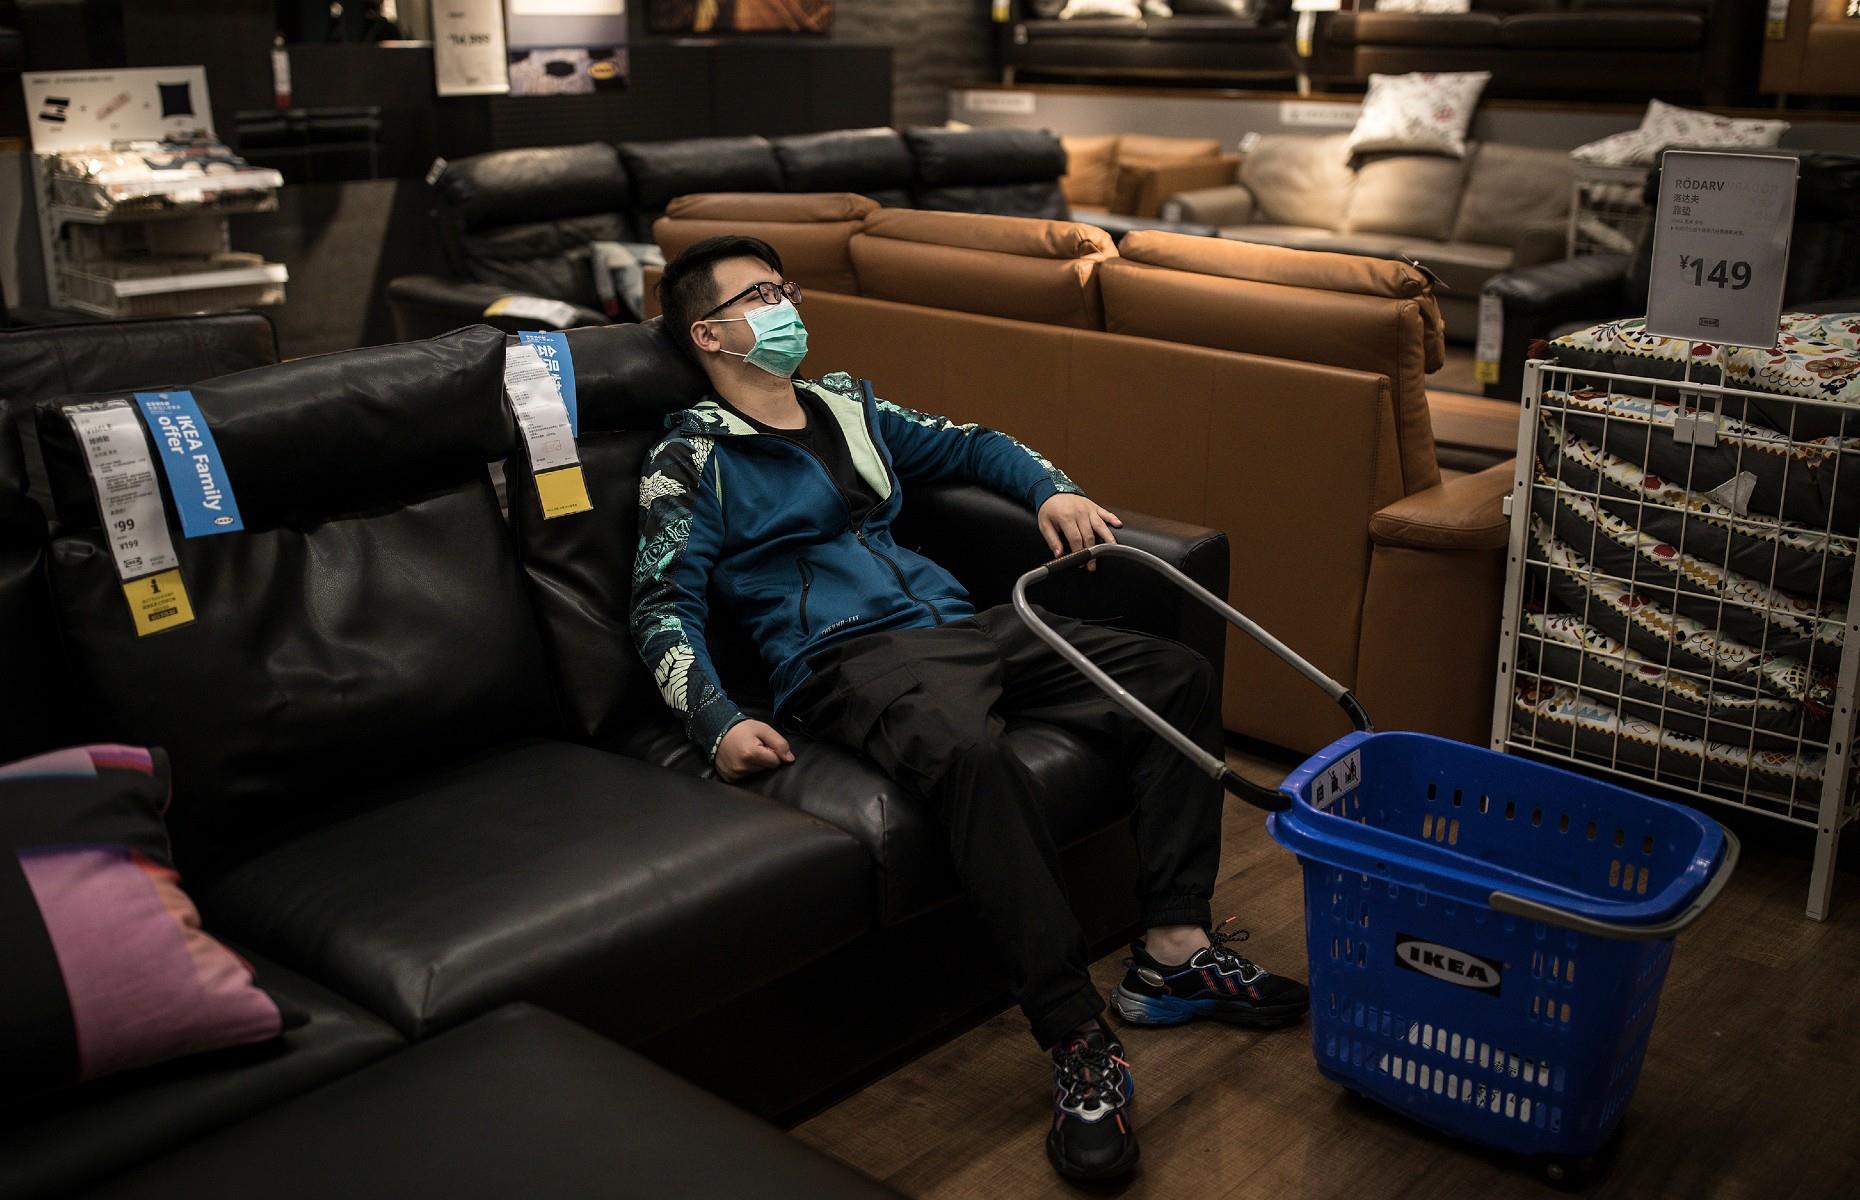 It's not unusual for people to nap in Chinese stores